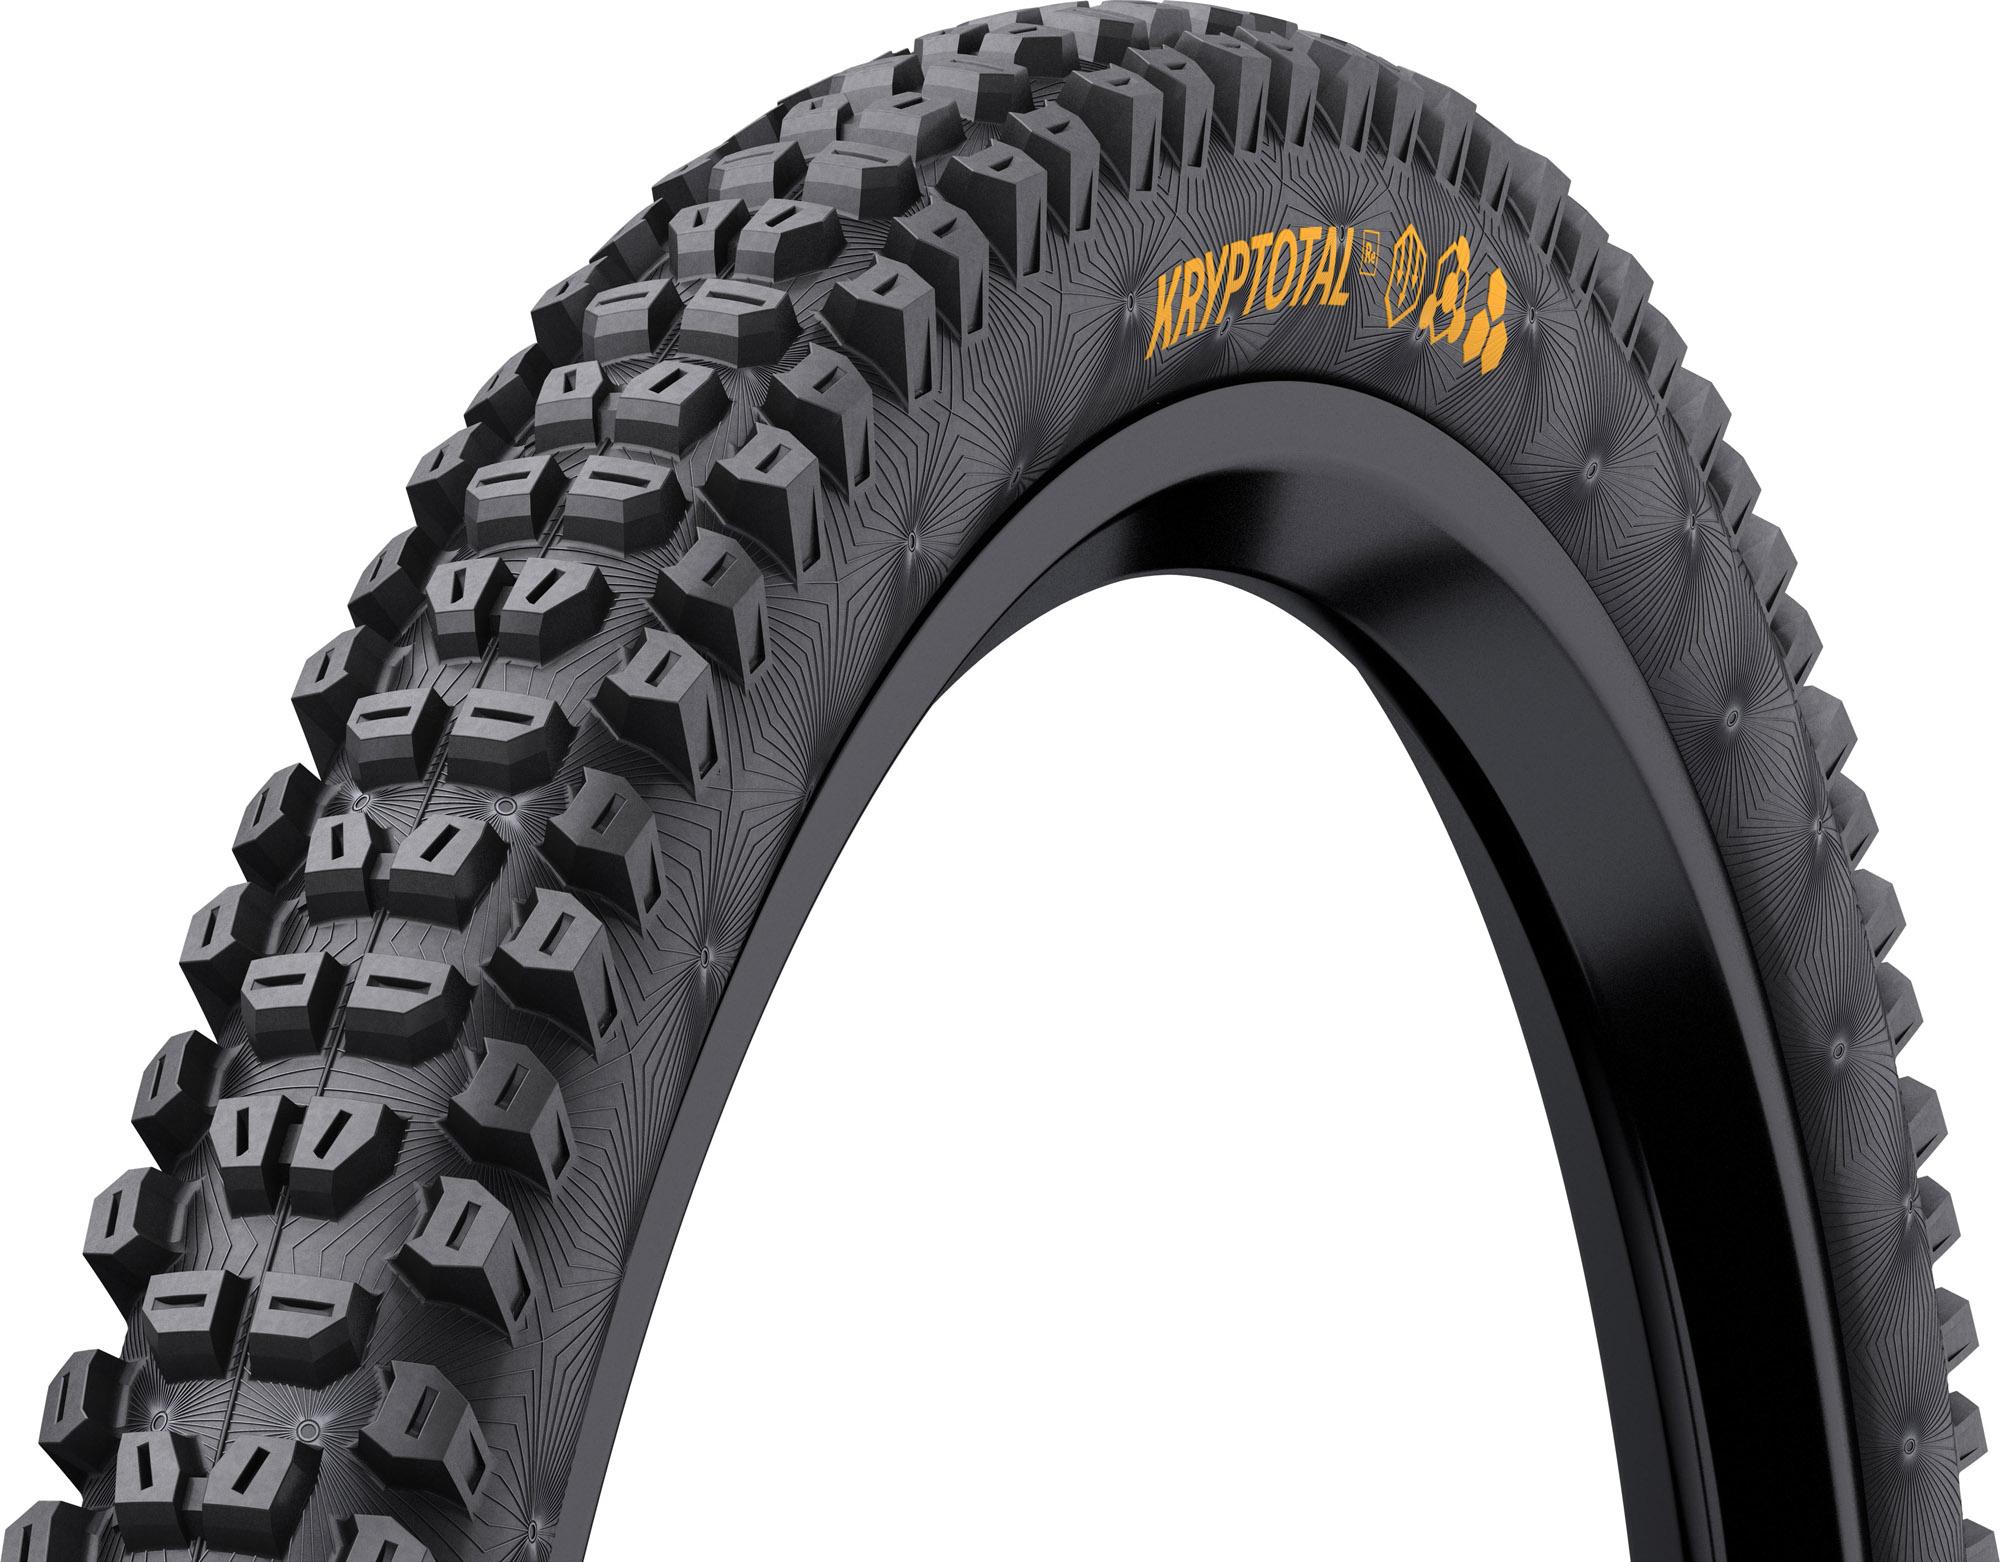 Continental Kryptotal-r Dh Supersoft Mtb Rear Tyre - Black